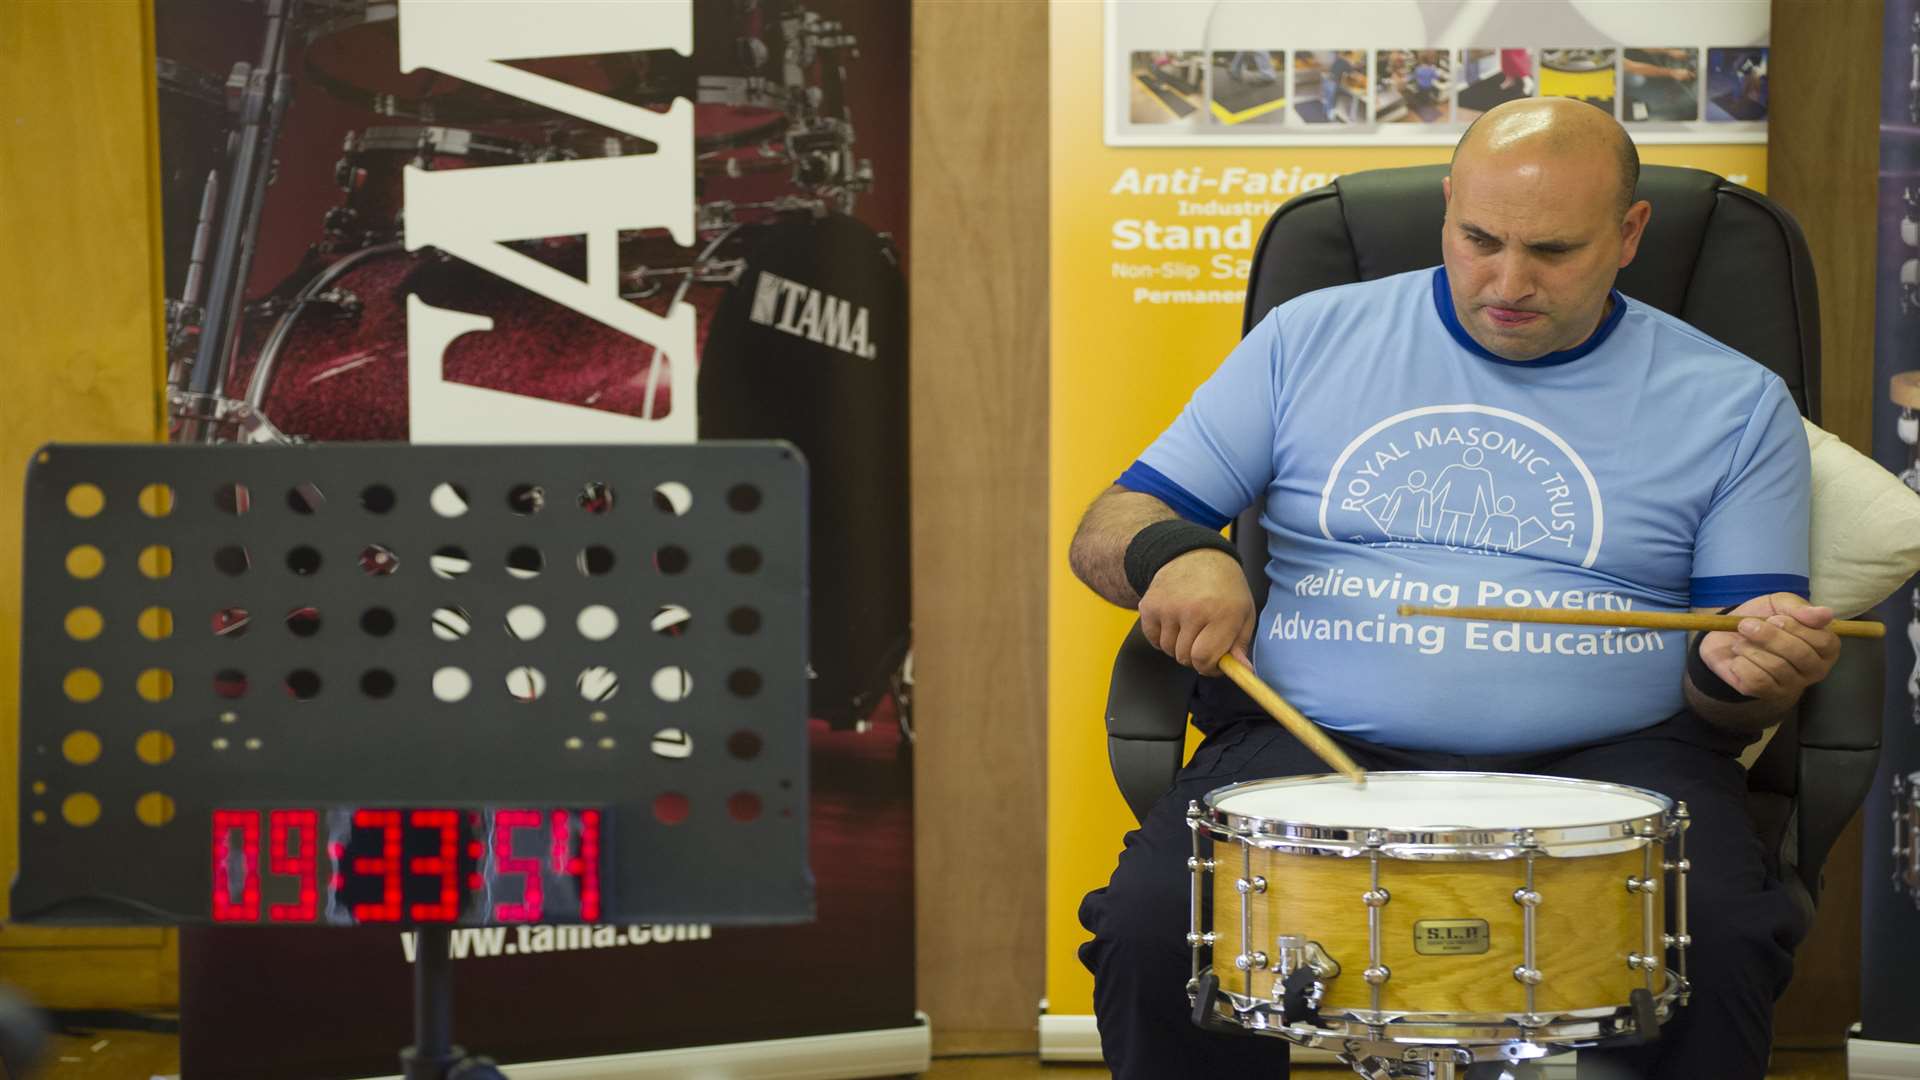 The world champion drummer beat the previous record by just over five minutes